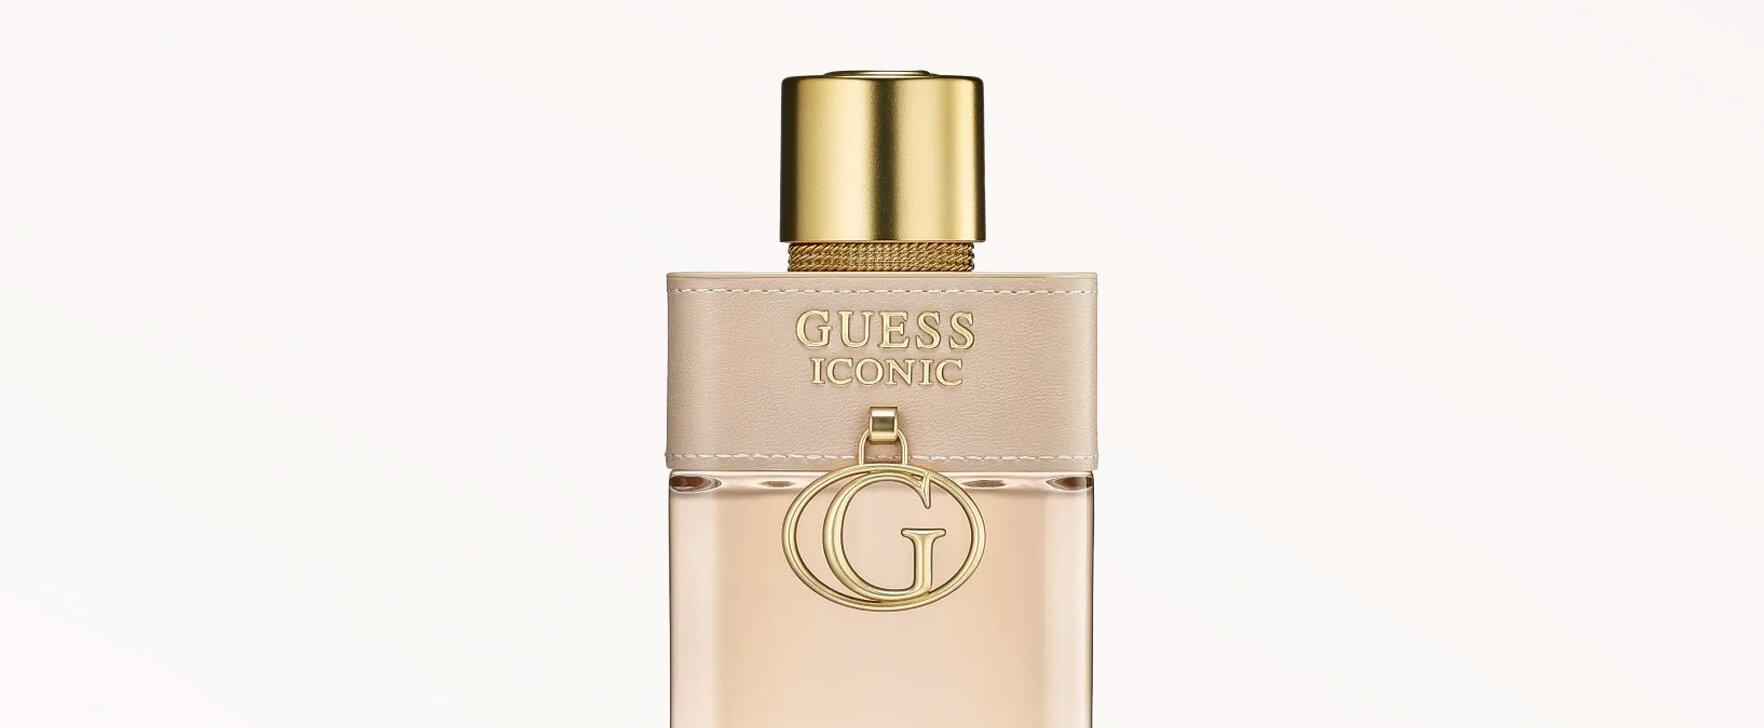 A Tribute to Sensuality and Glamor: The New "Iconic" Eau de Parfum From Guess